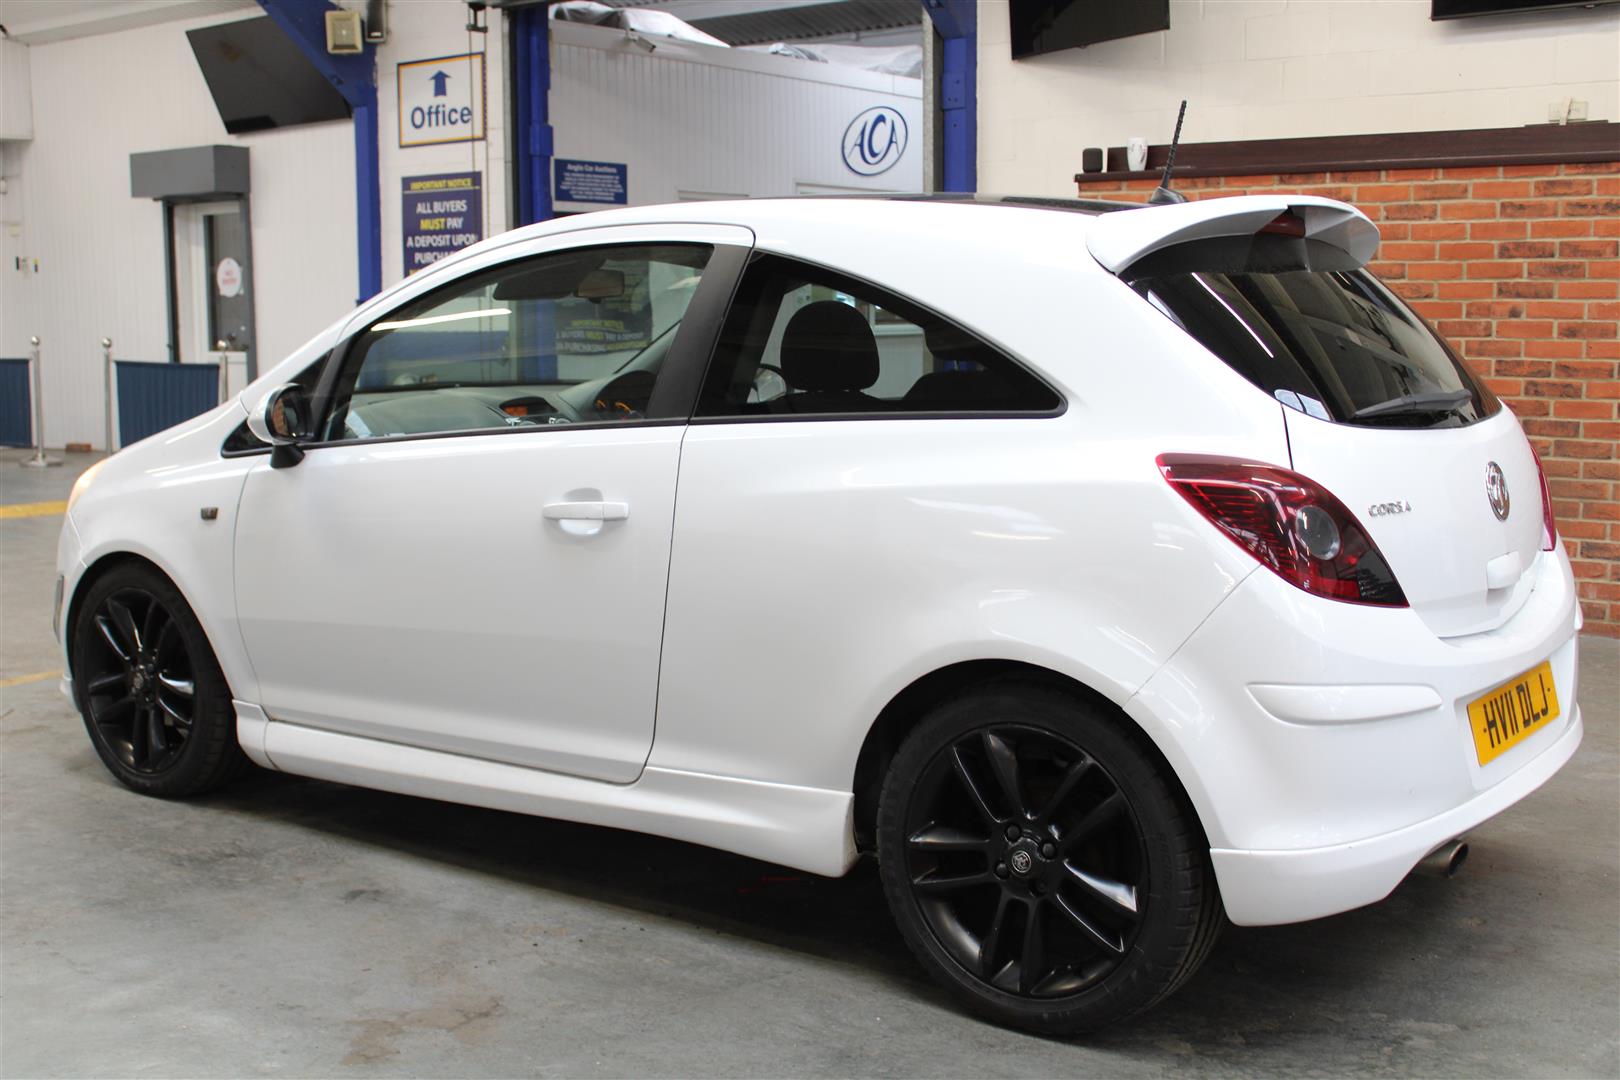 11 11 Vauxhall Corsa Limited Edition - Image 32 of 33